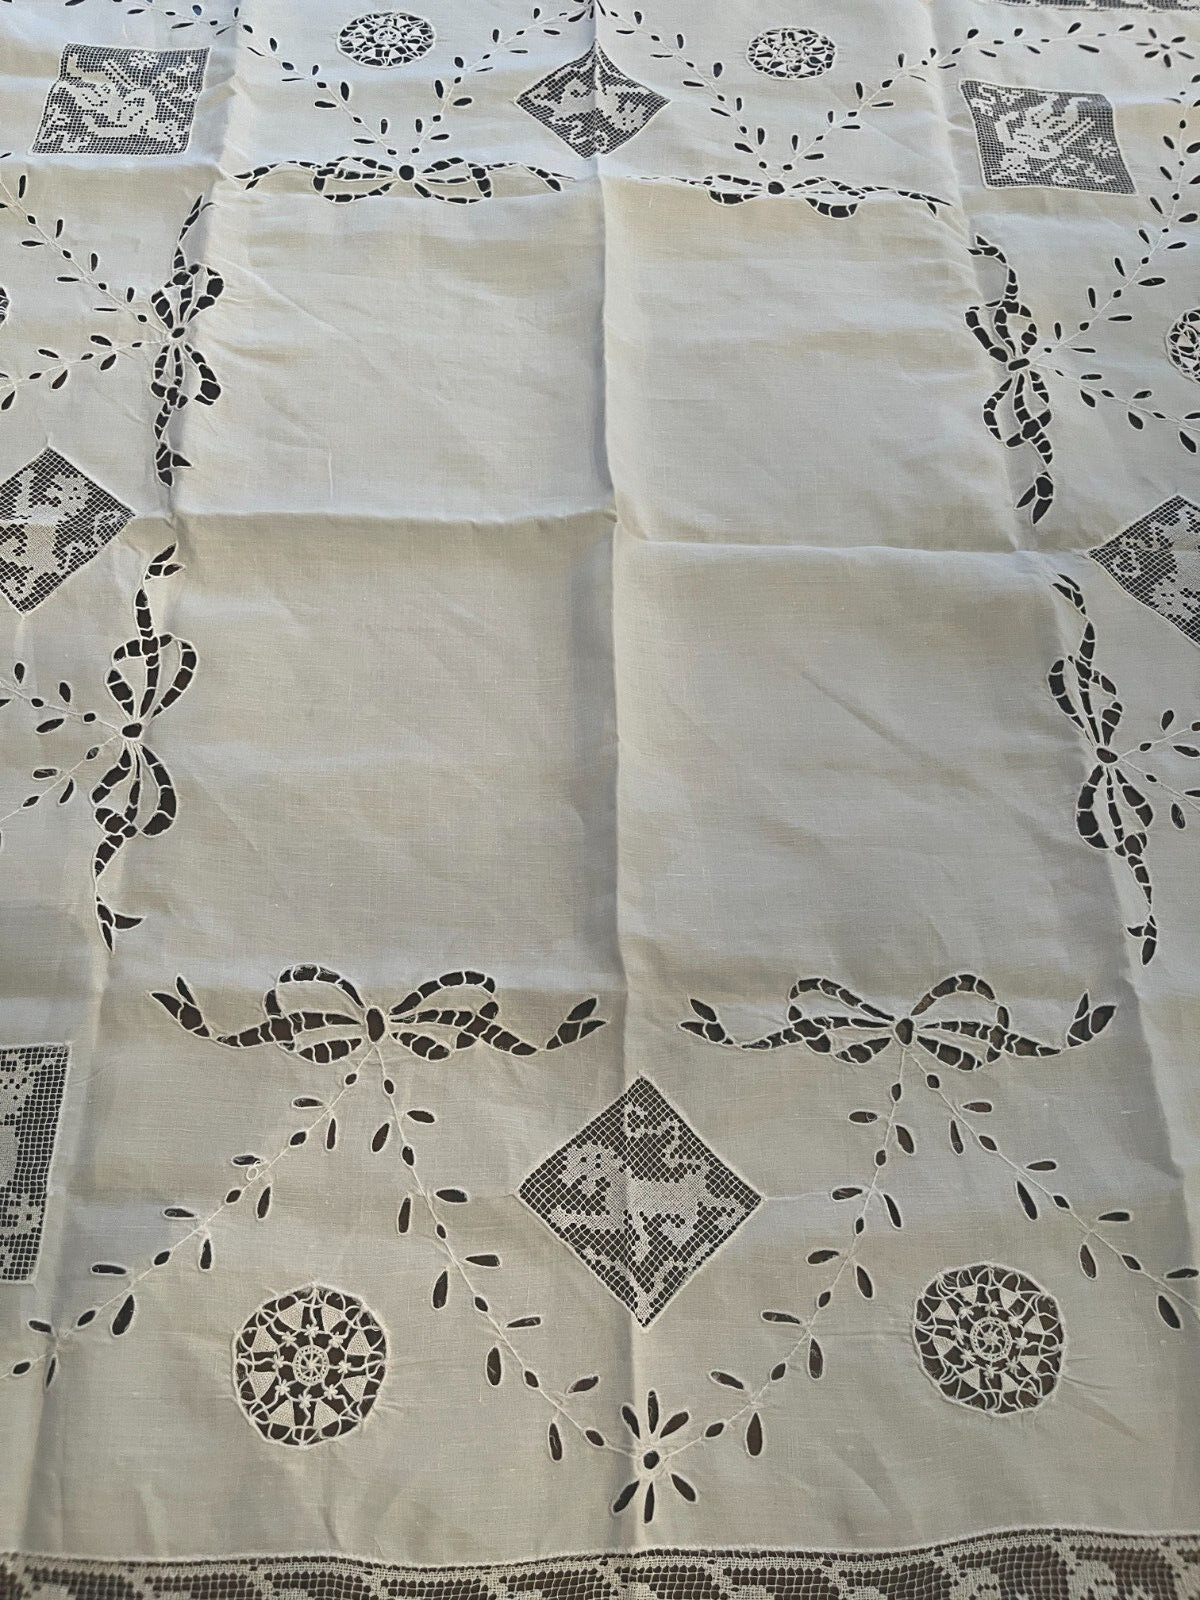 Antique Italian Cut Linen Reticella, Filet Lace, Eyelet Embroiderky Tablecloth